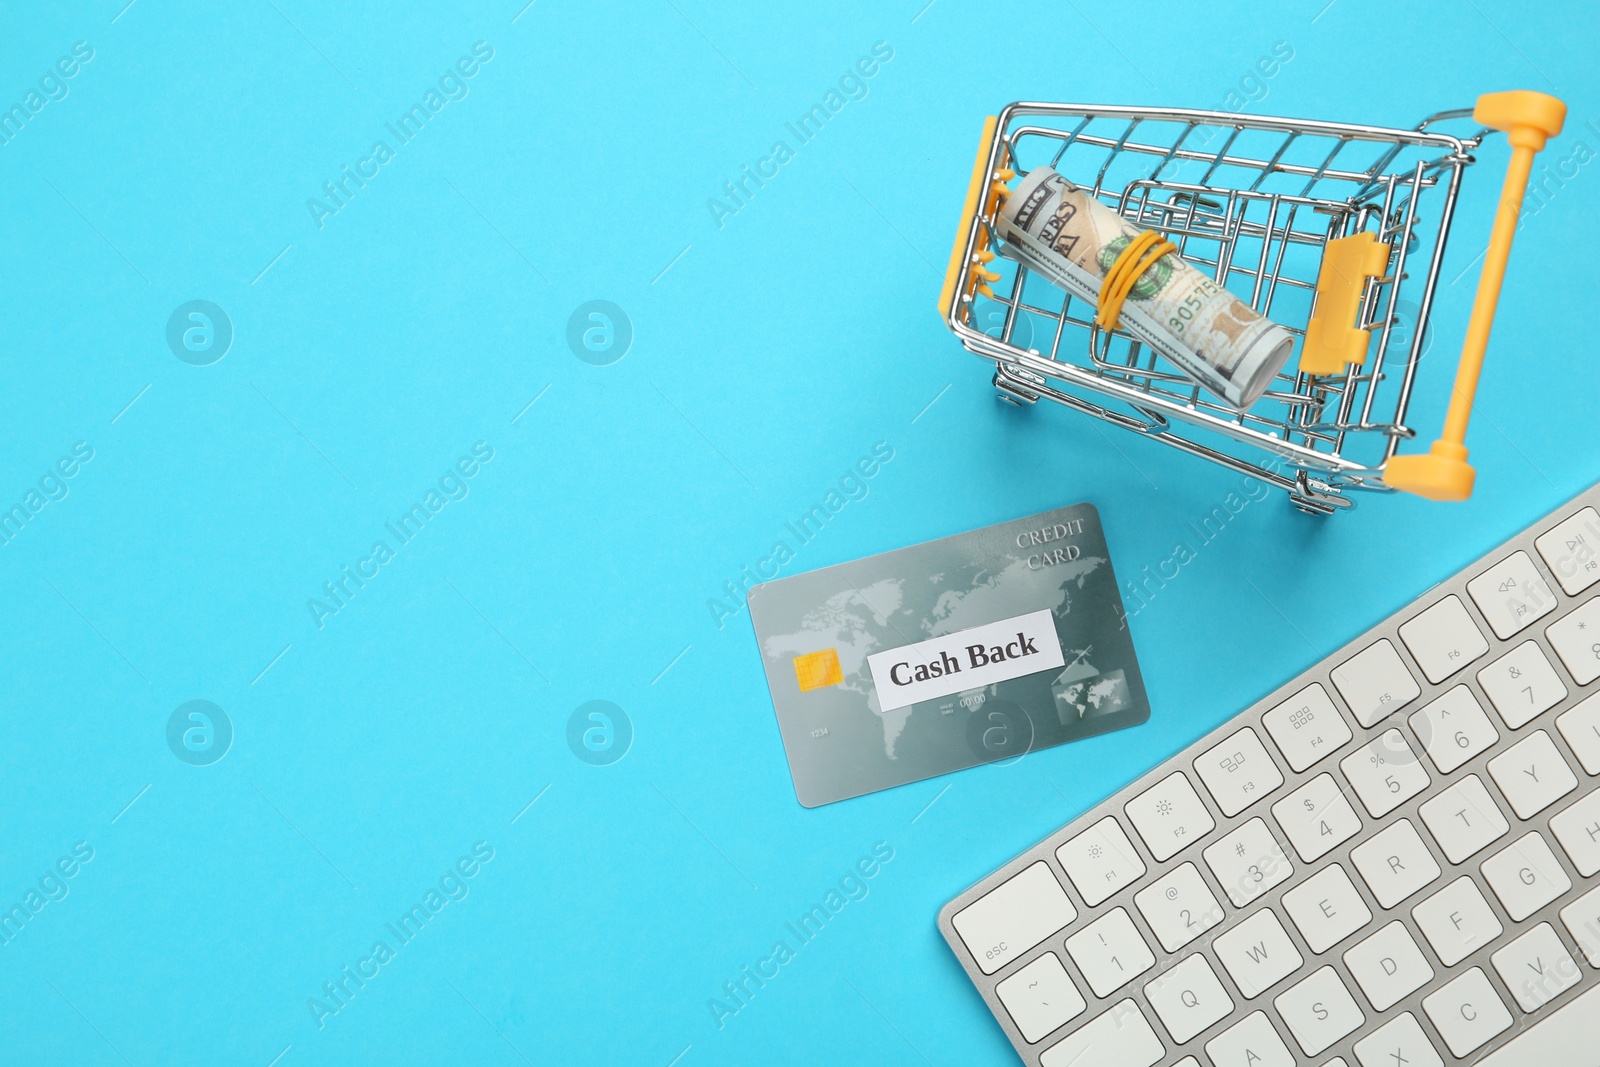 Photo of Keyboard, credit card and rolled dollar banknotes in shopping cart on light blue background, flat lay with space for text. Cashback concept